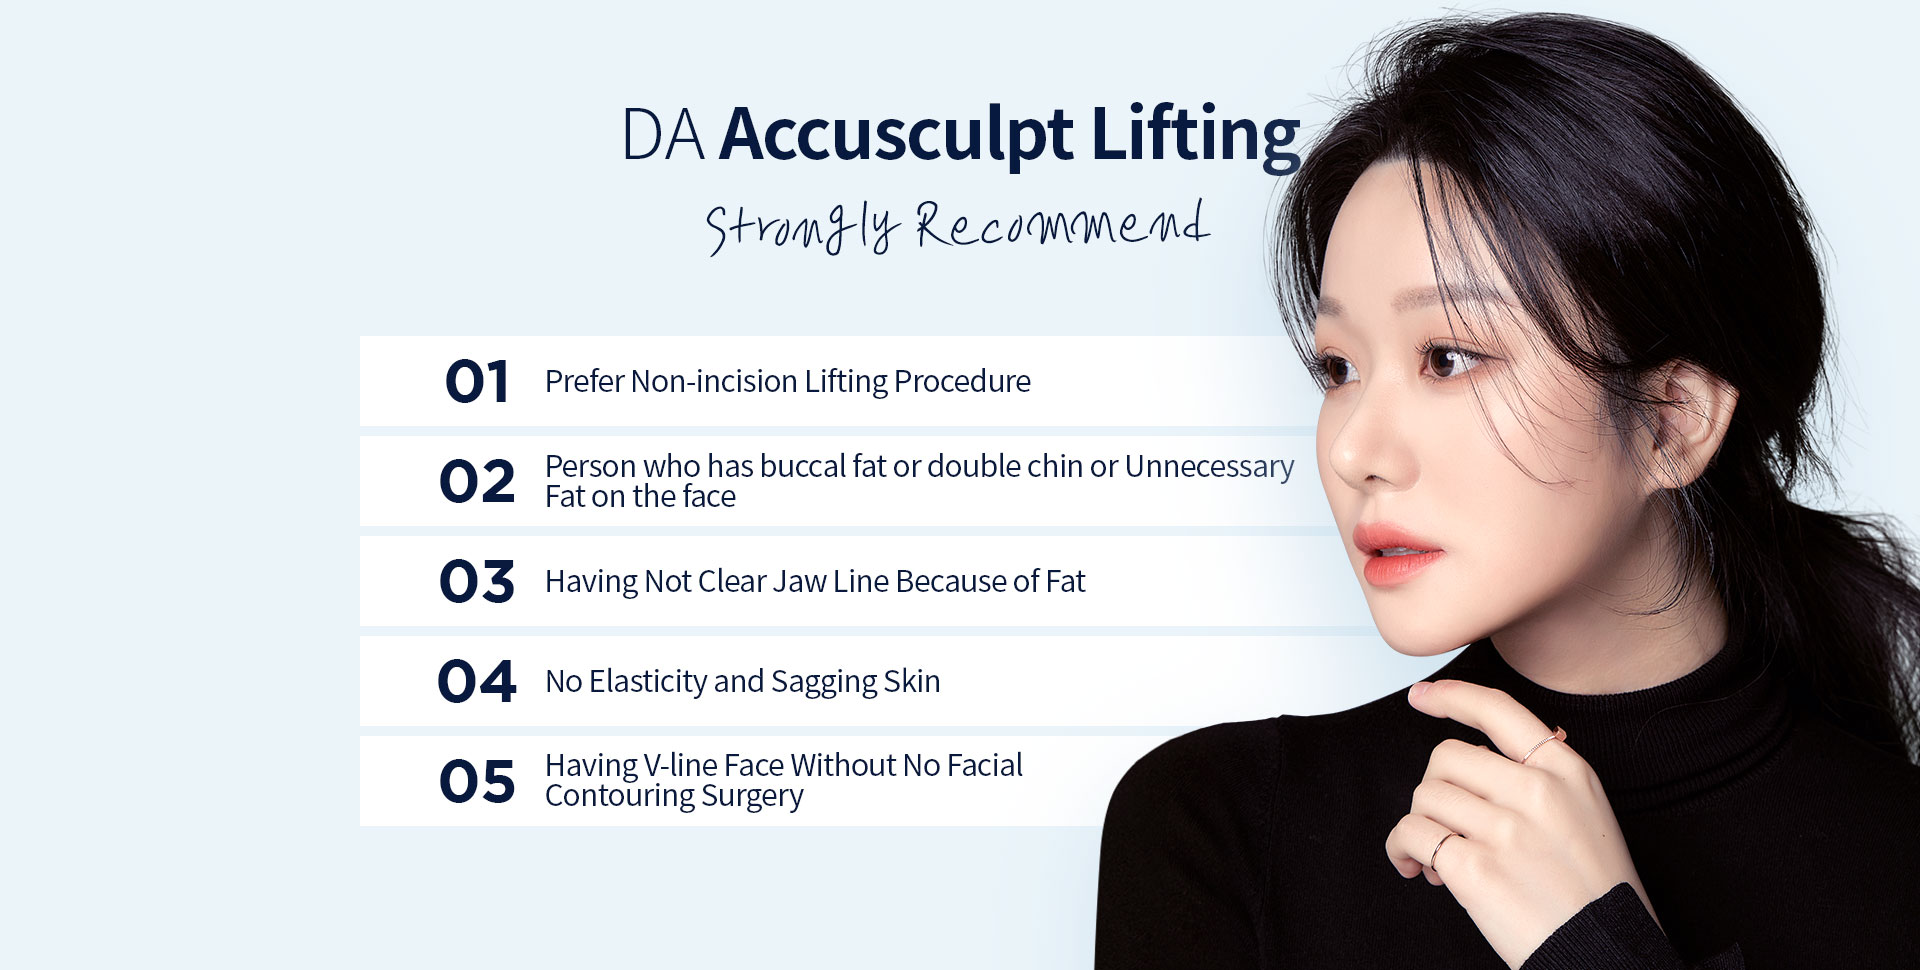 DA Accusculpt Lifting Strongly Recommend